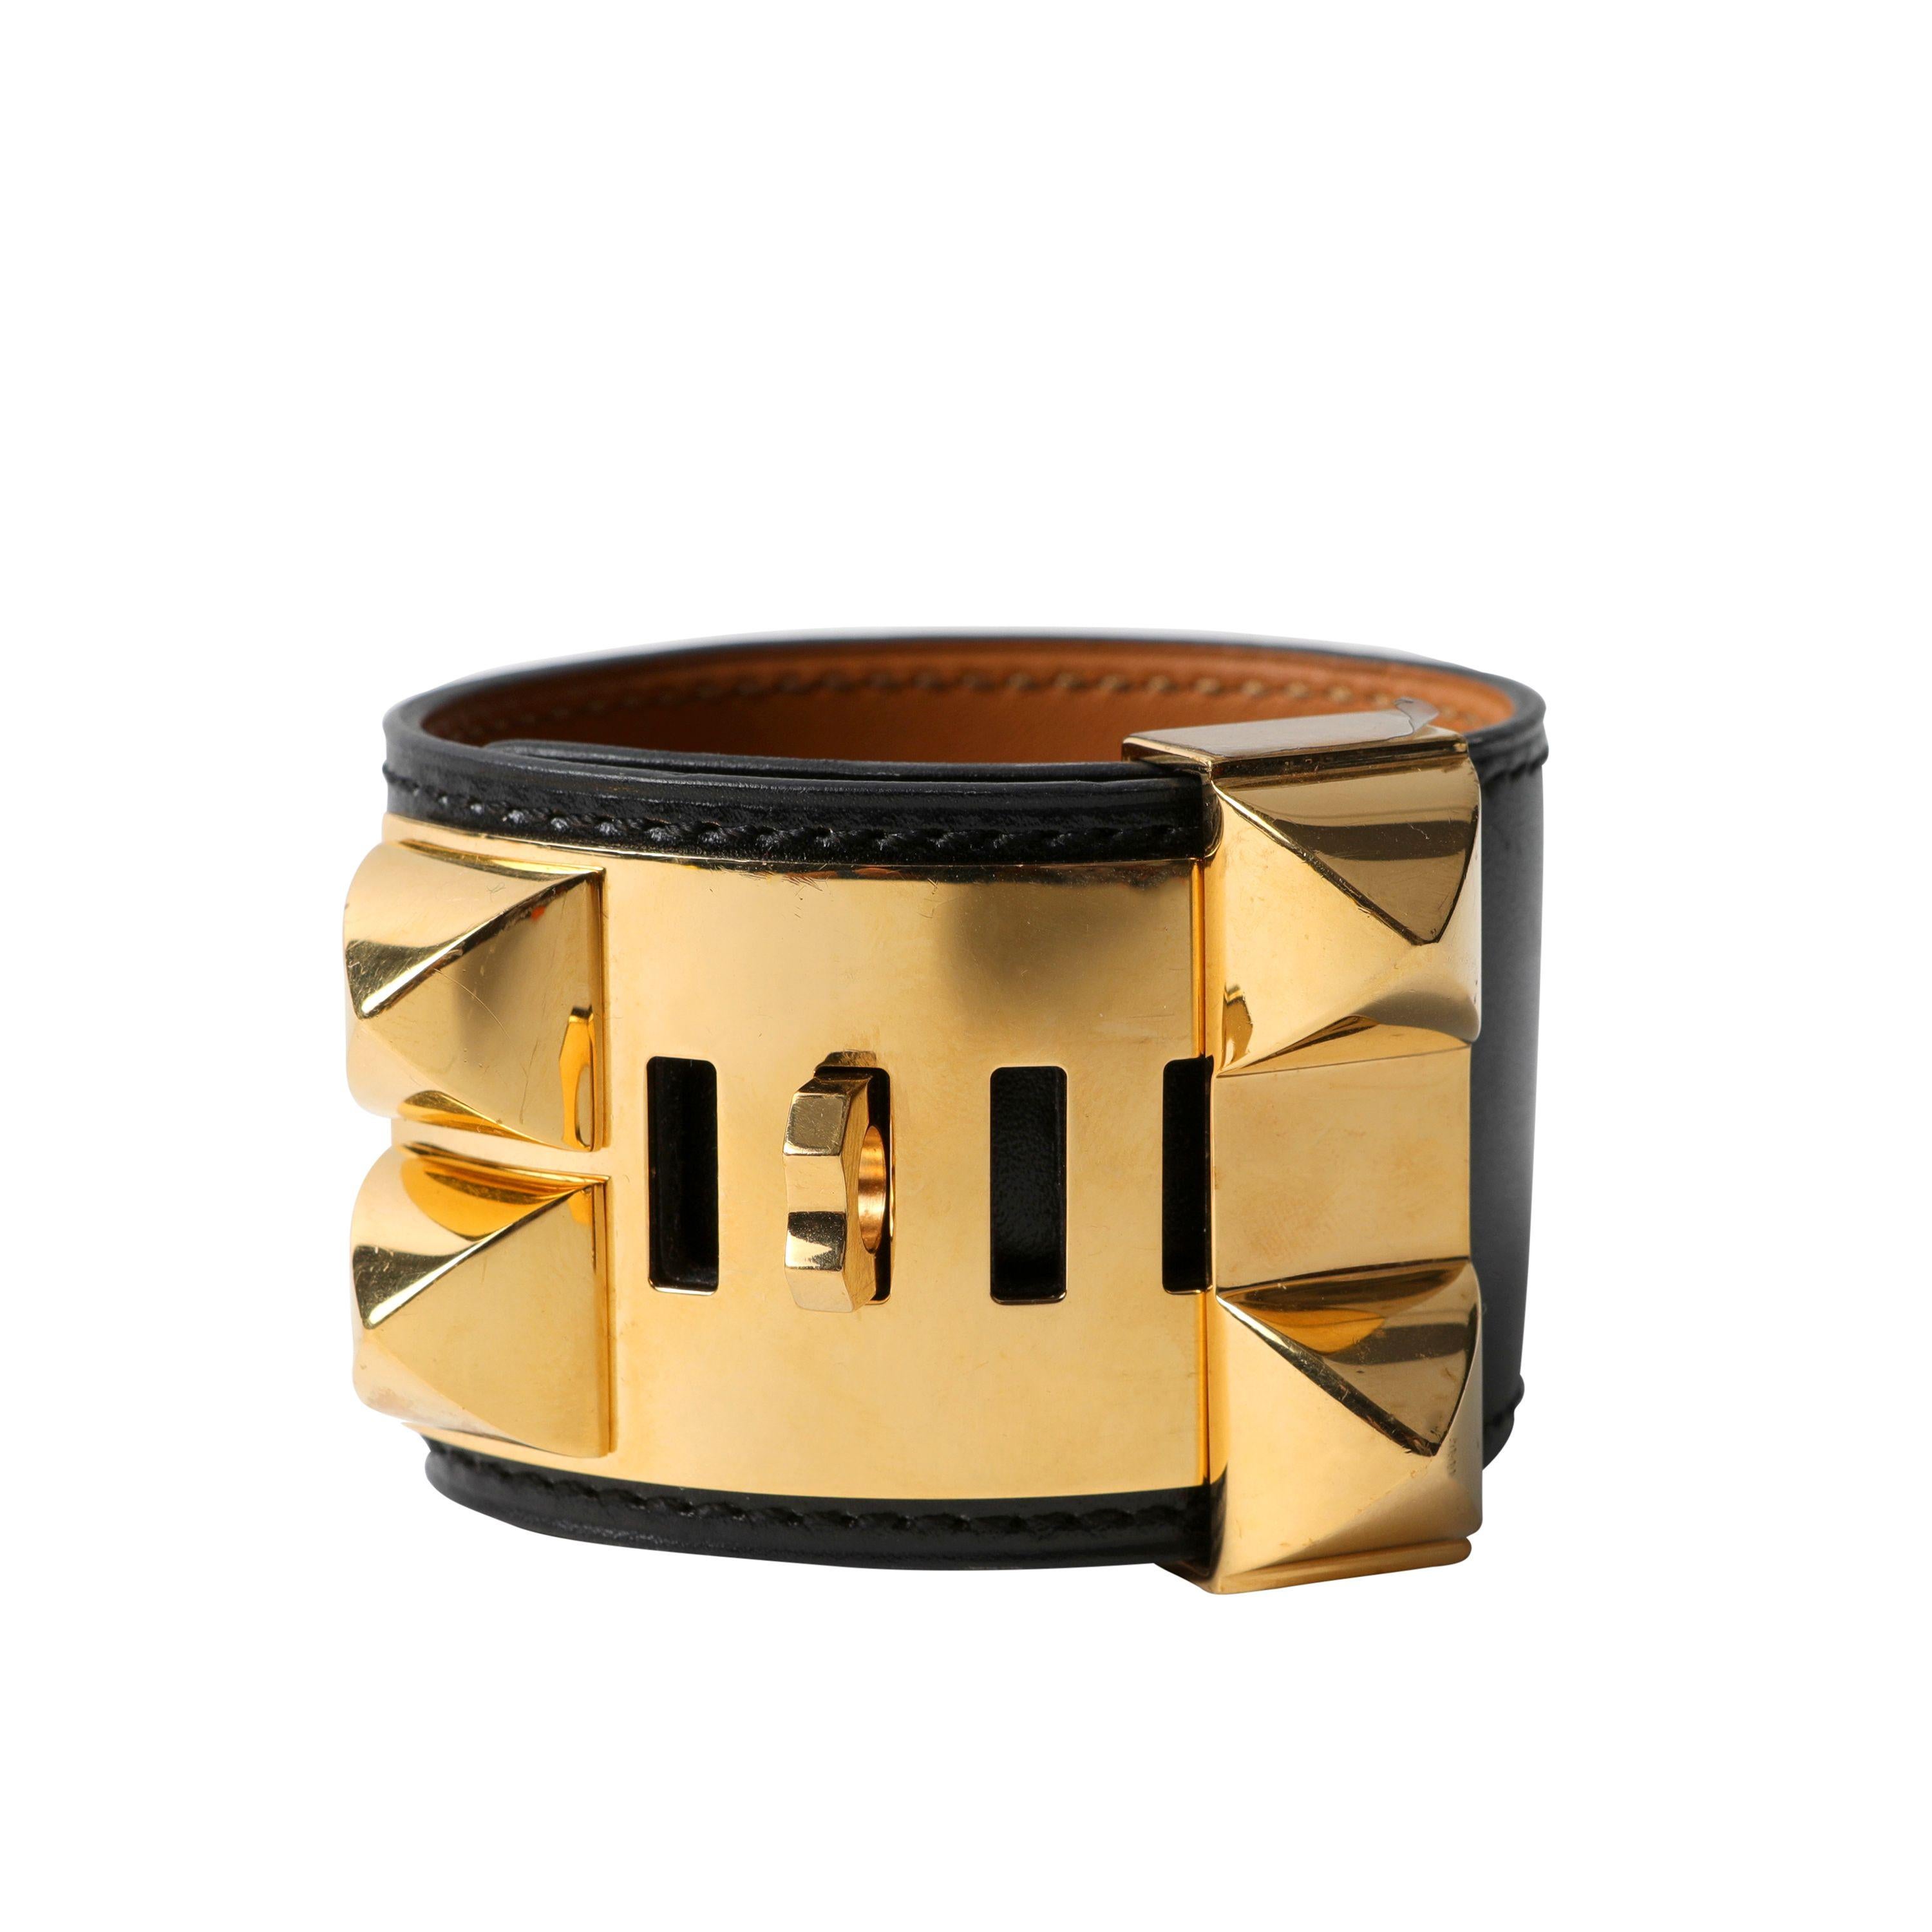 This authentic Hermès Black Collier de Chien Bracelet Cuff is in pristine condition.  The iconic Hermès CDC adds a chic bit of edginess to any ensemble.  Black leather with gold Medor pyramid style studs and ring.  Adjustable length.  Box or pouch